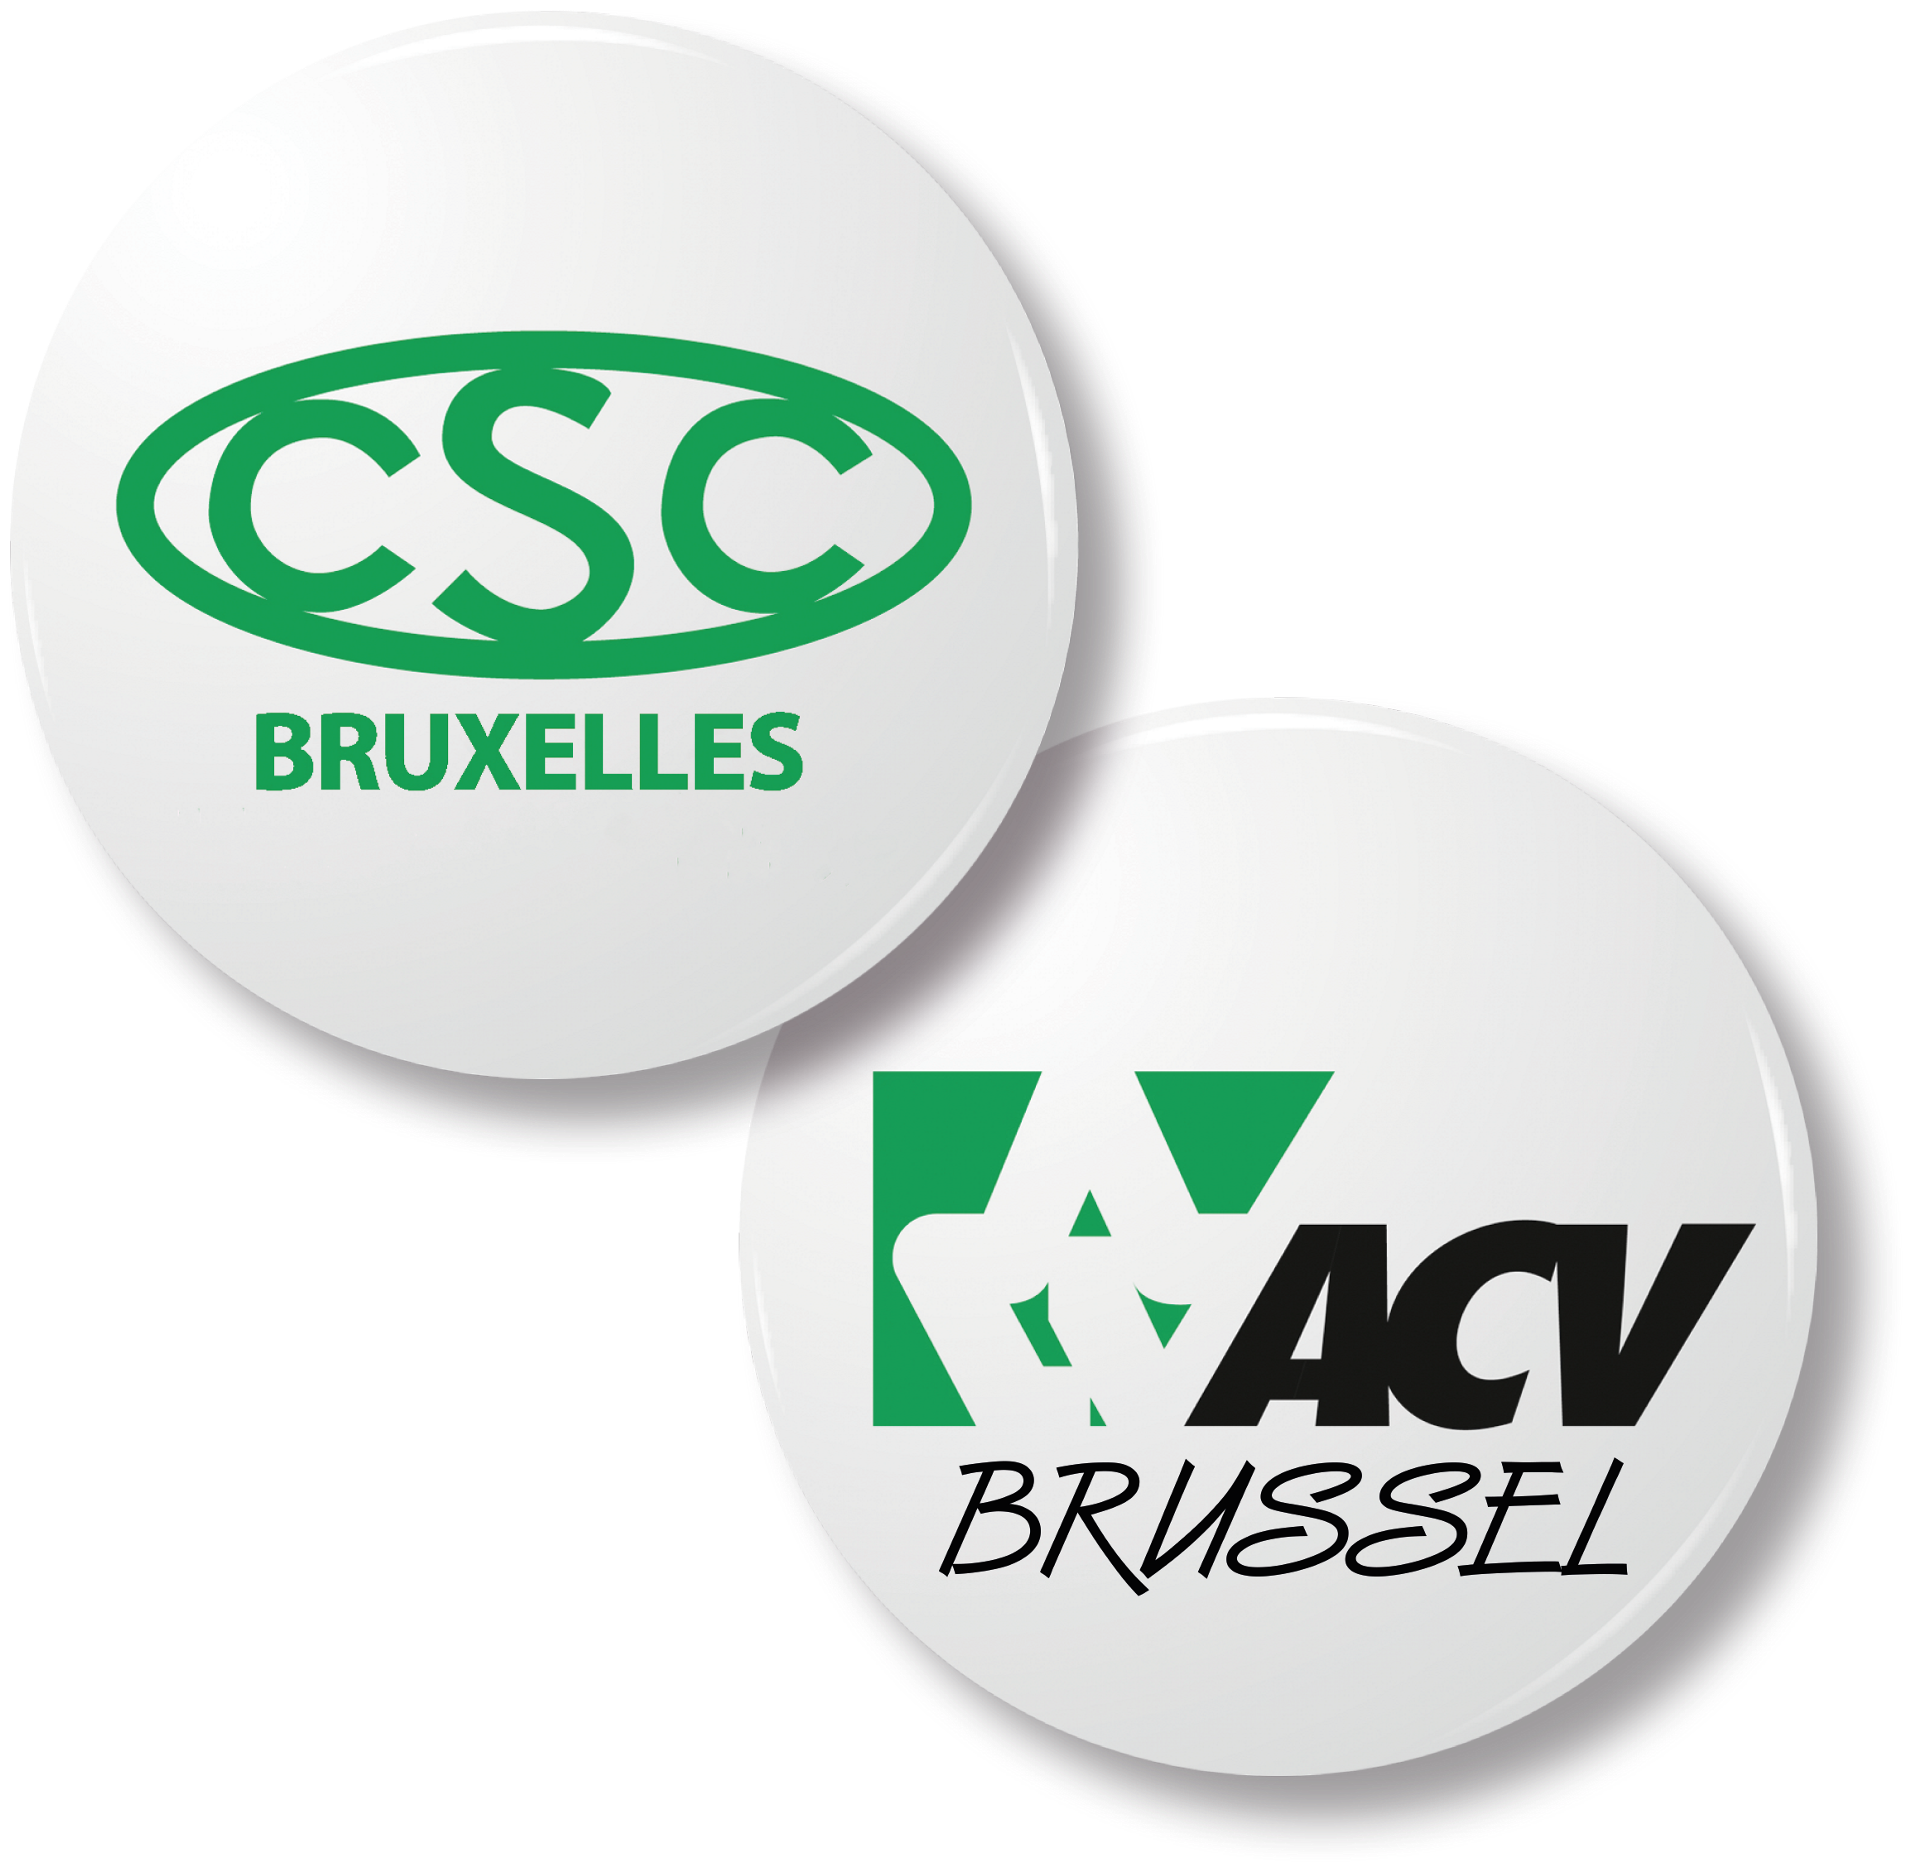 acv-csc-brussels